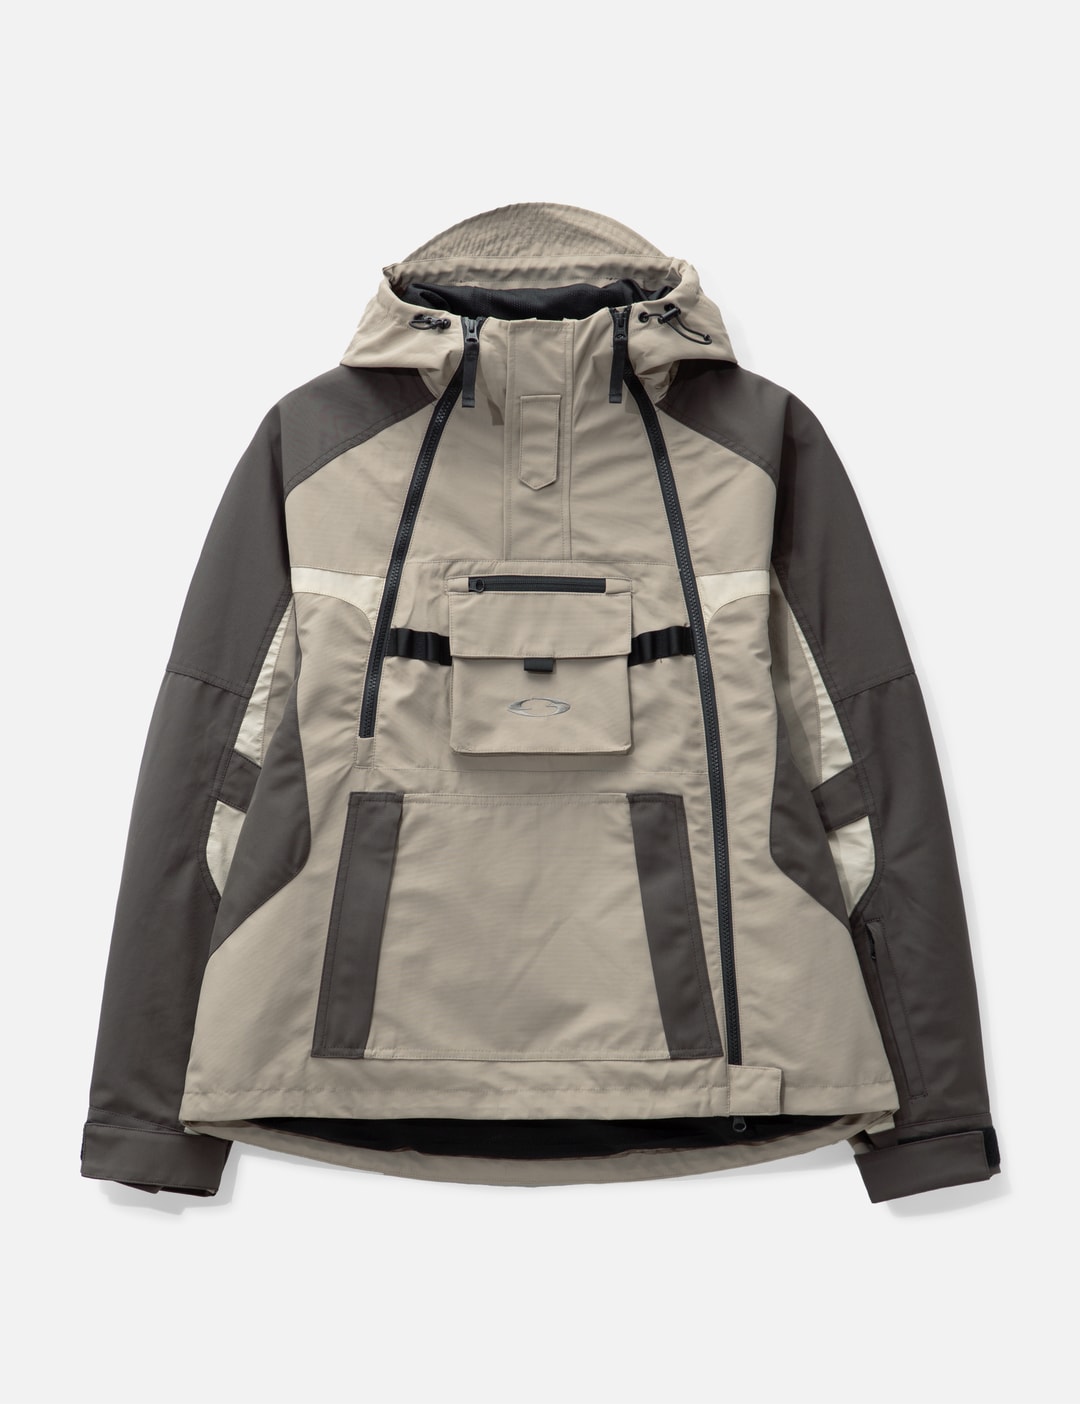 GRAILZ - Technical Shell Jacket | HBX - Globally Curated Fashion and ...